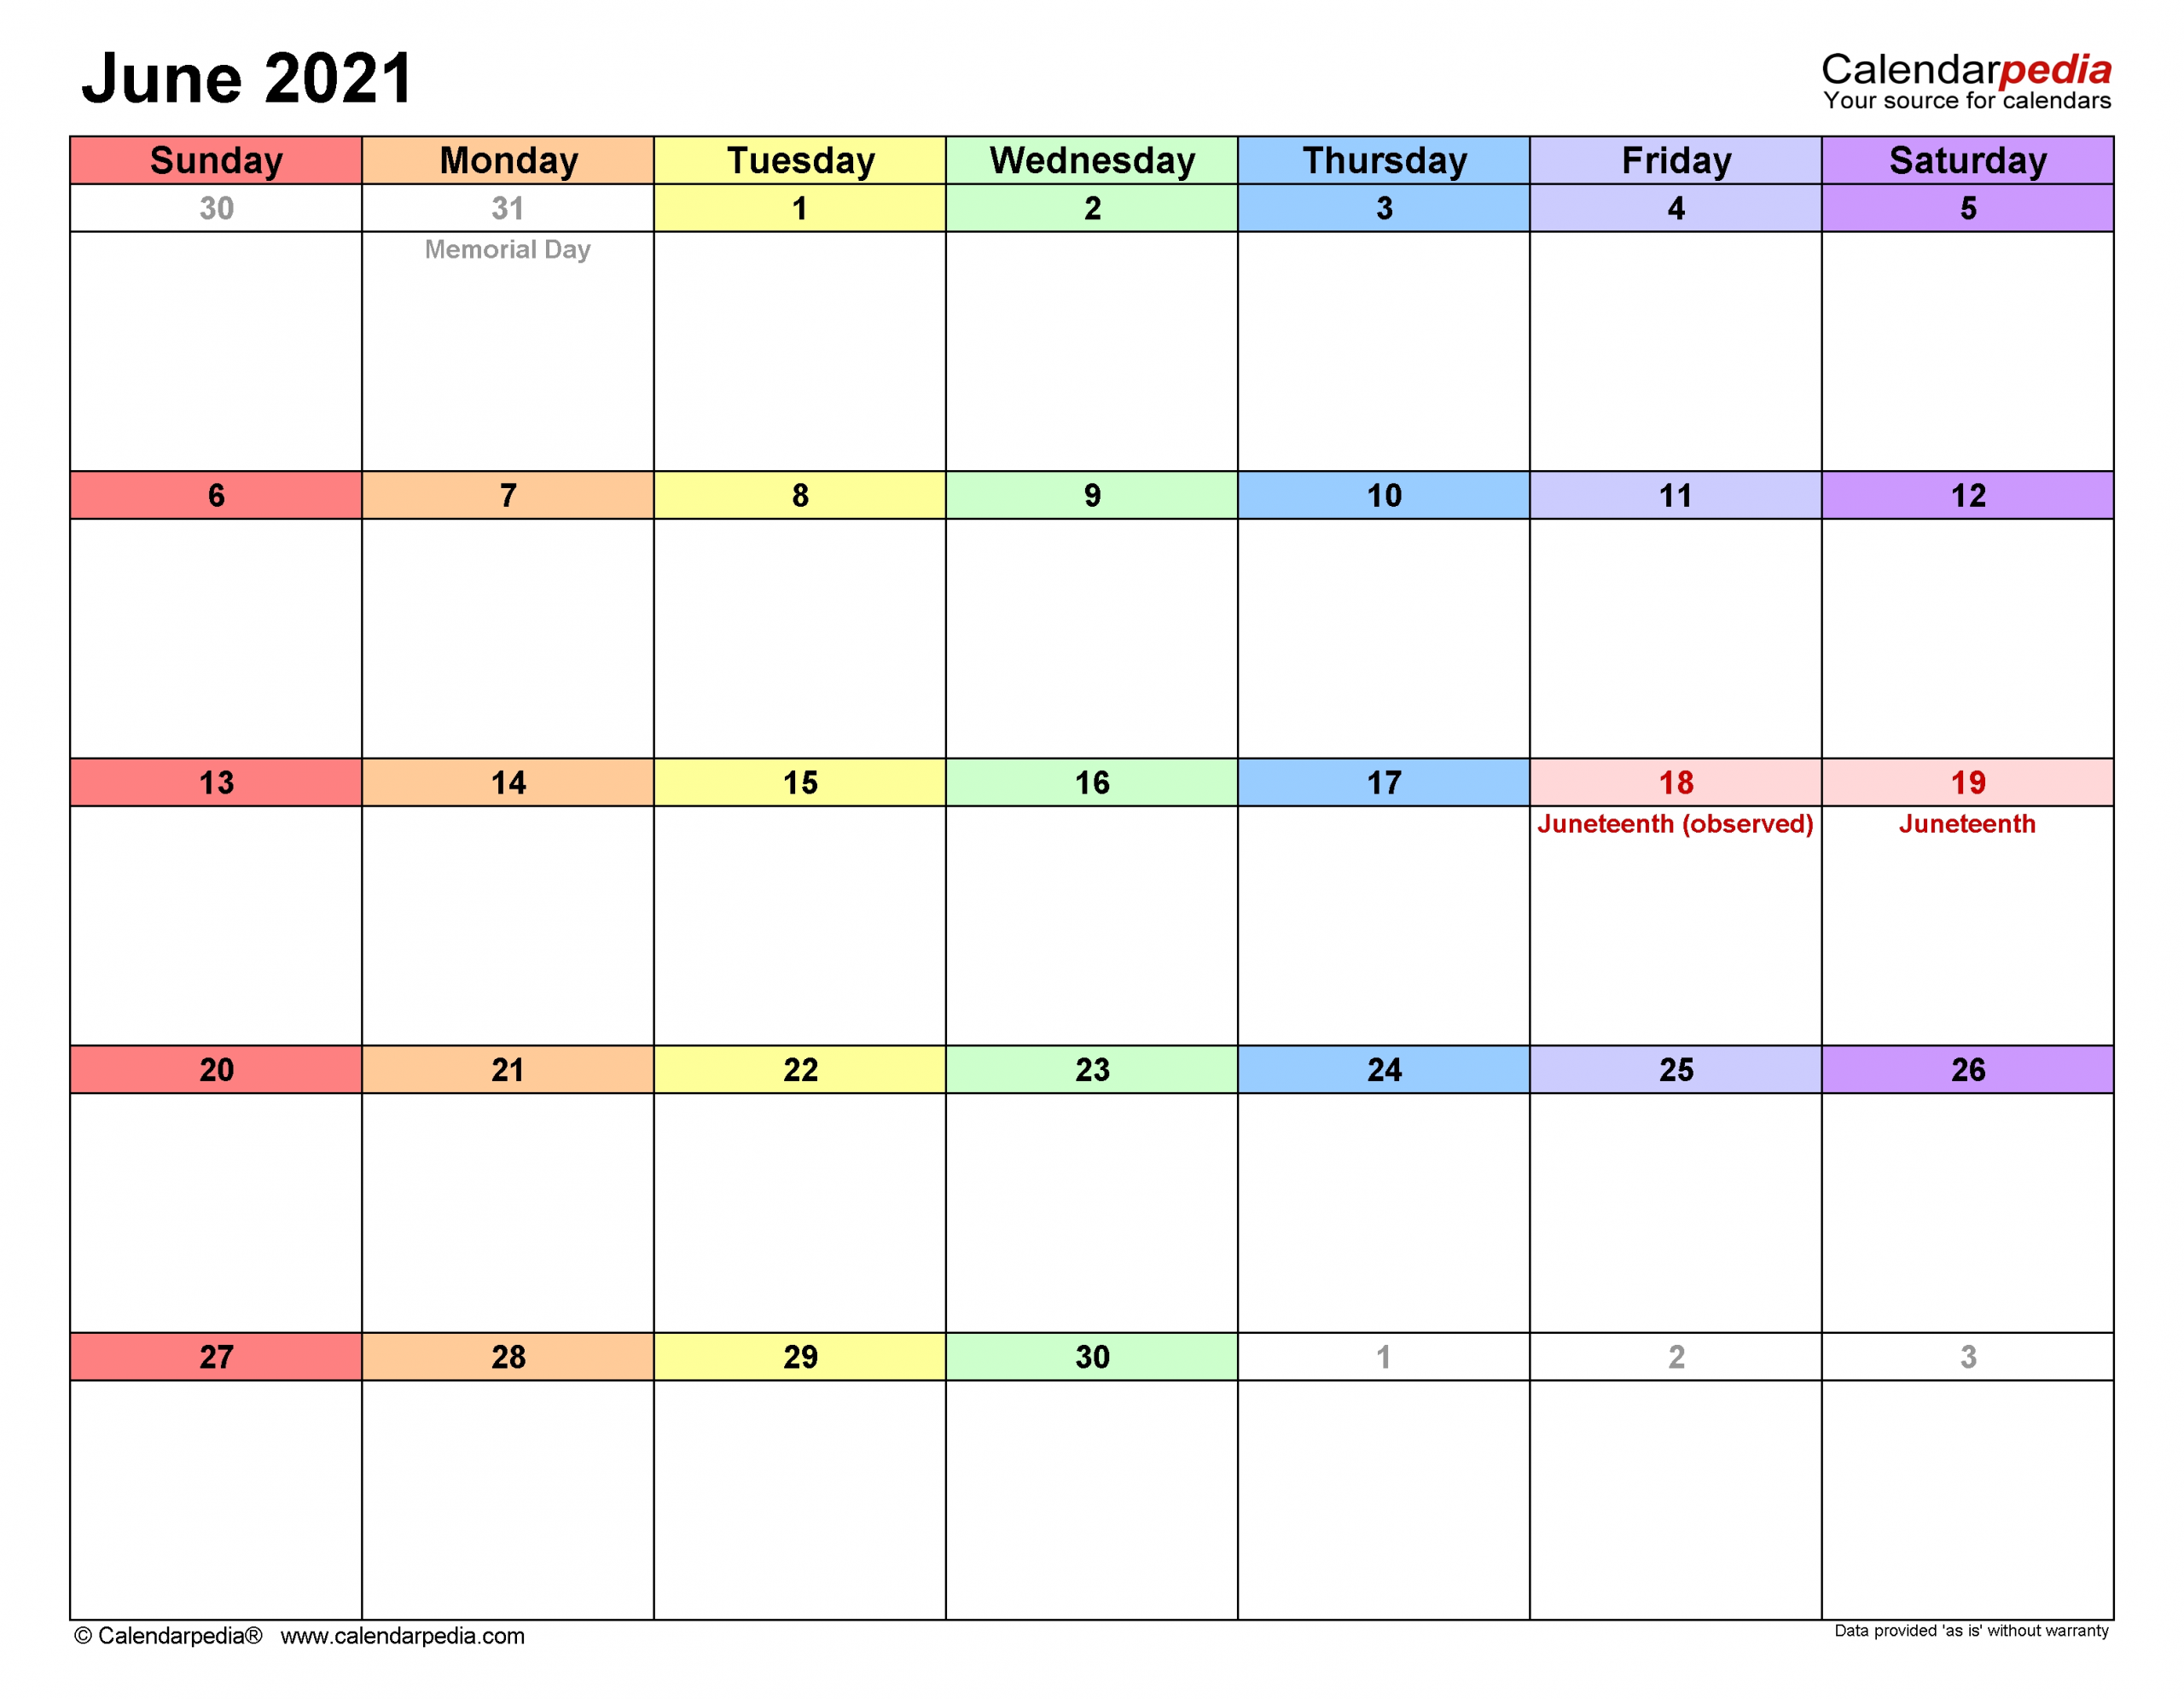 June 2021 Calendar | Templates For Word, Excel And Pdf